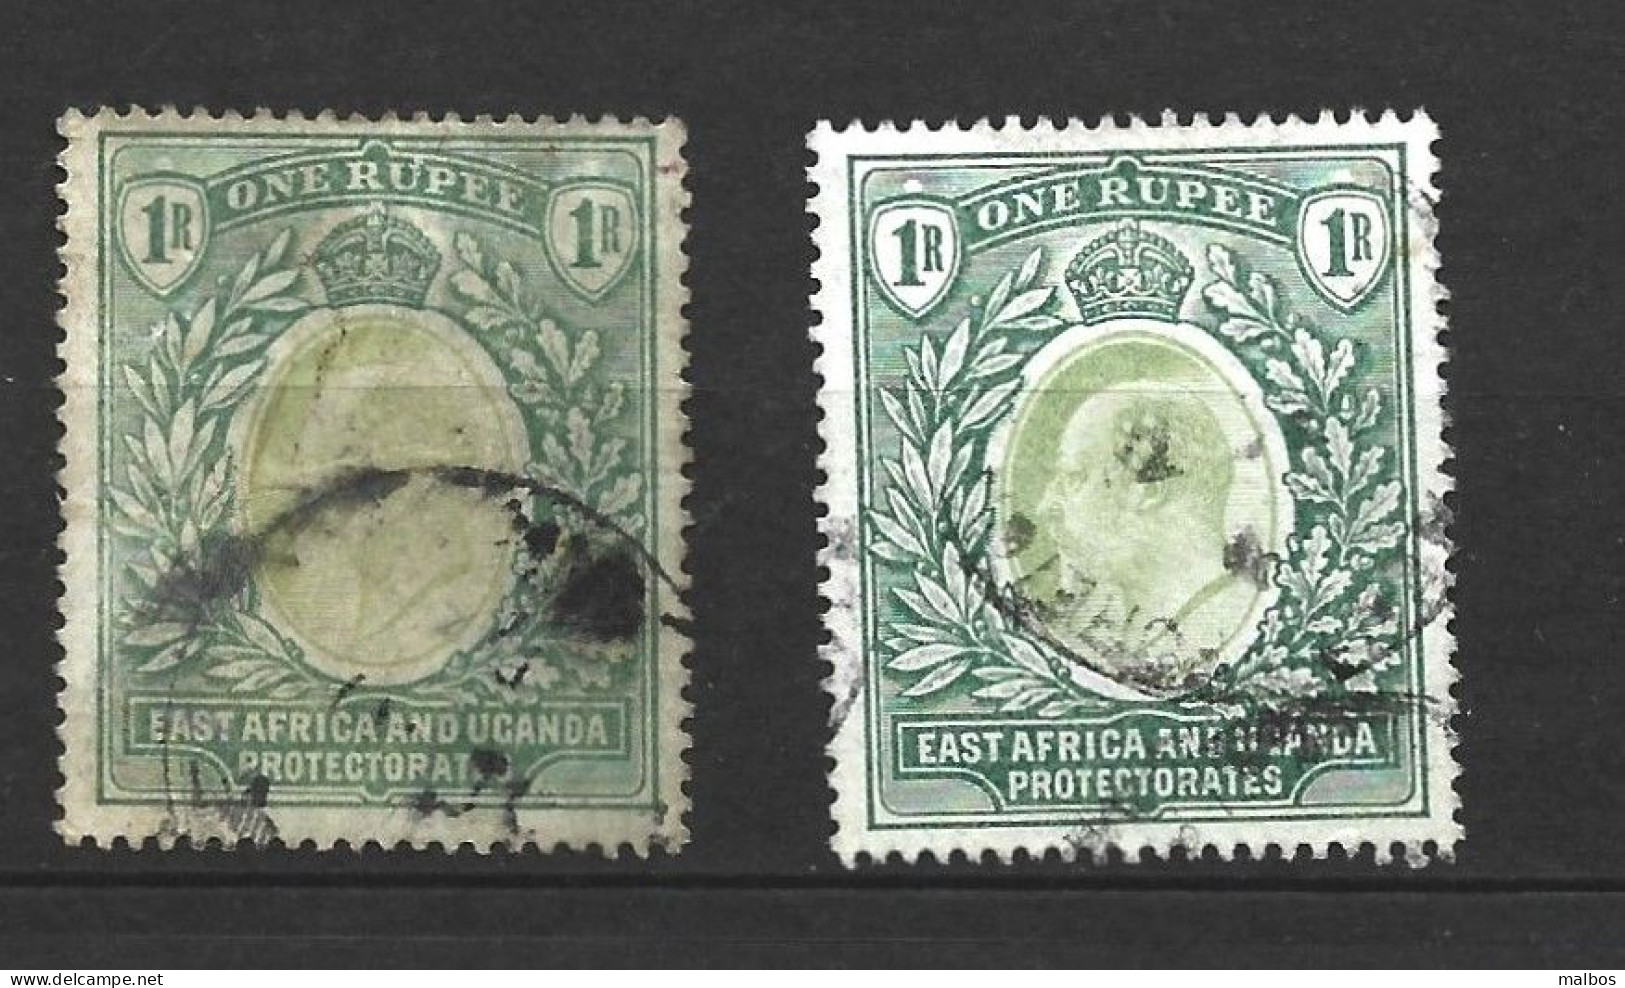 EAST AFRICA & OUGANDA PROTECTORATE  1903   (o)  - S&G 9 + 9a (chalk-surfaced Paper)   - Wmk Crown CC - East Africa & Uganda Protectorates